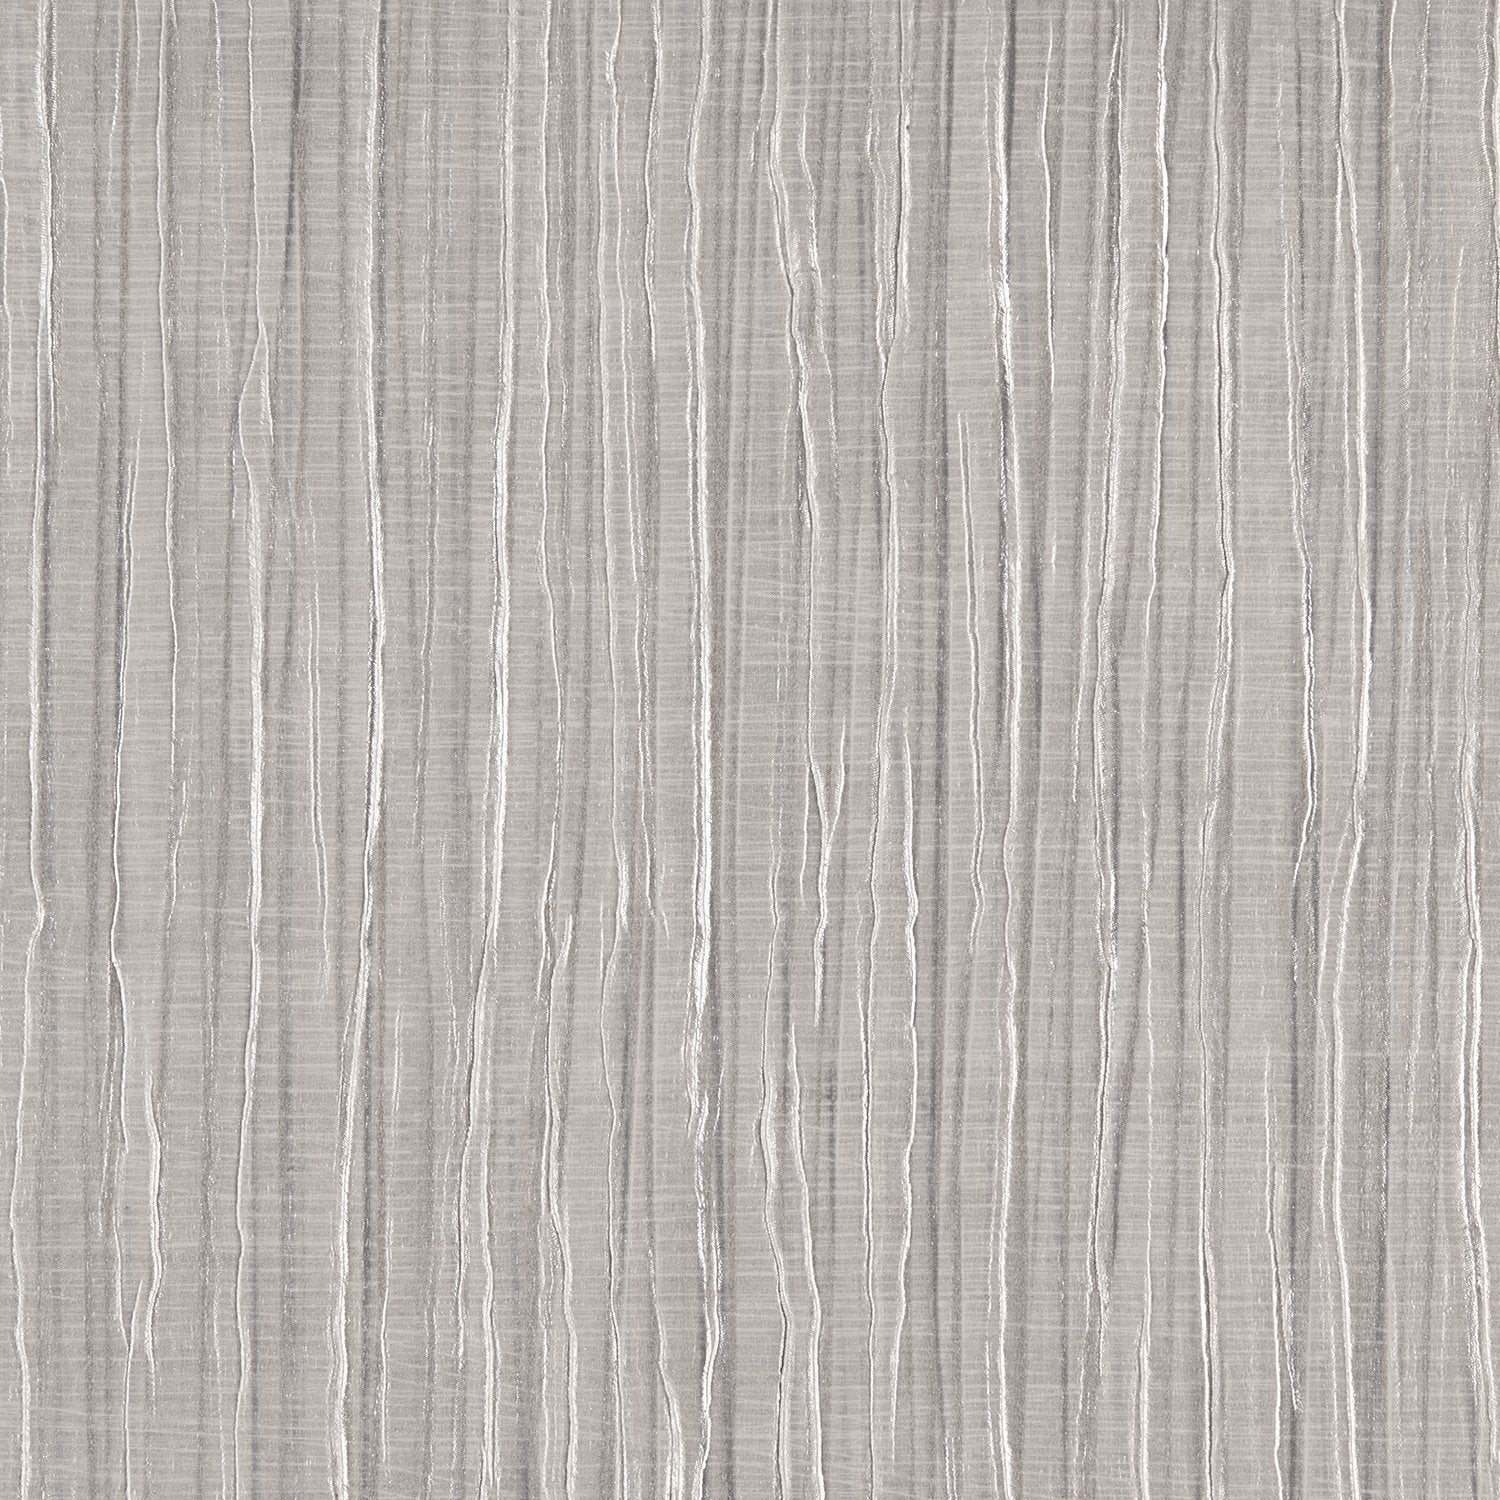 Vogue Pleat - Y47018 - Wallcovering - Vycon - Kube Contract